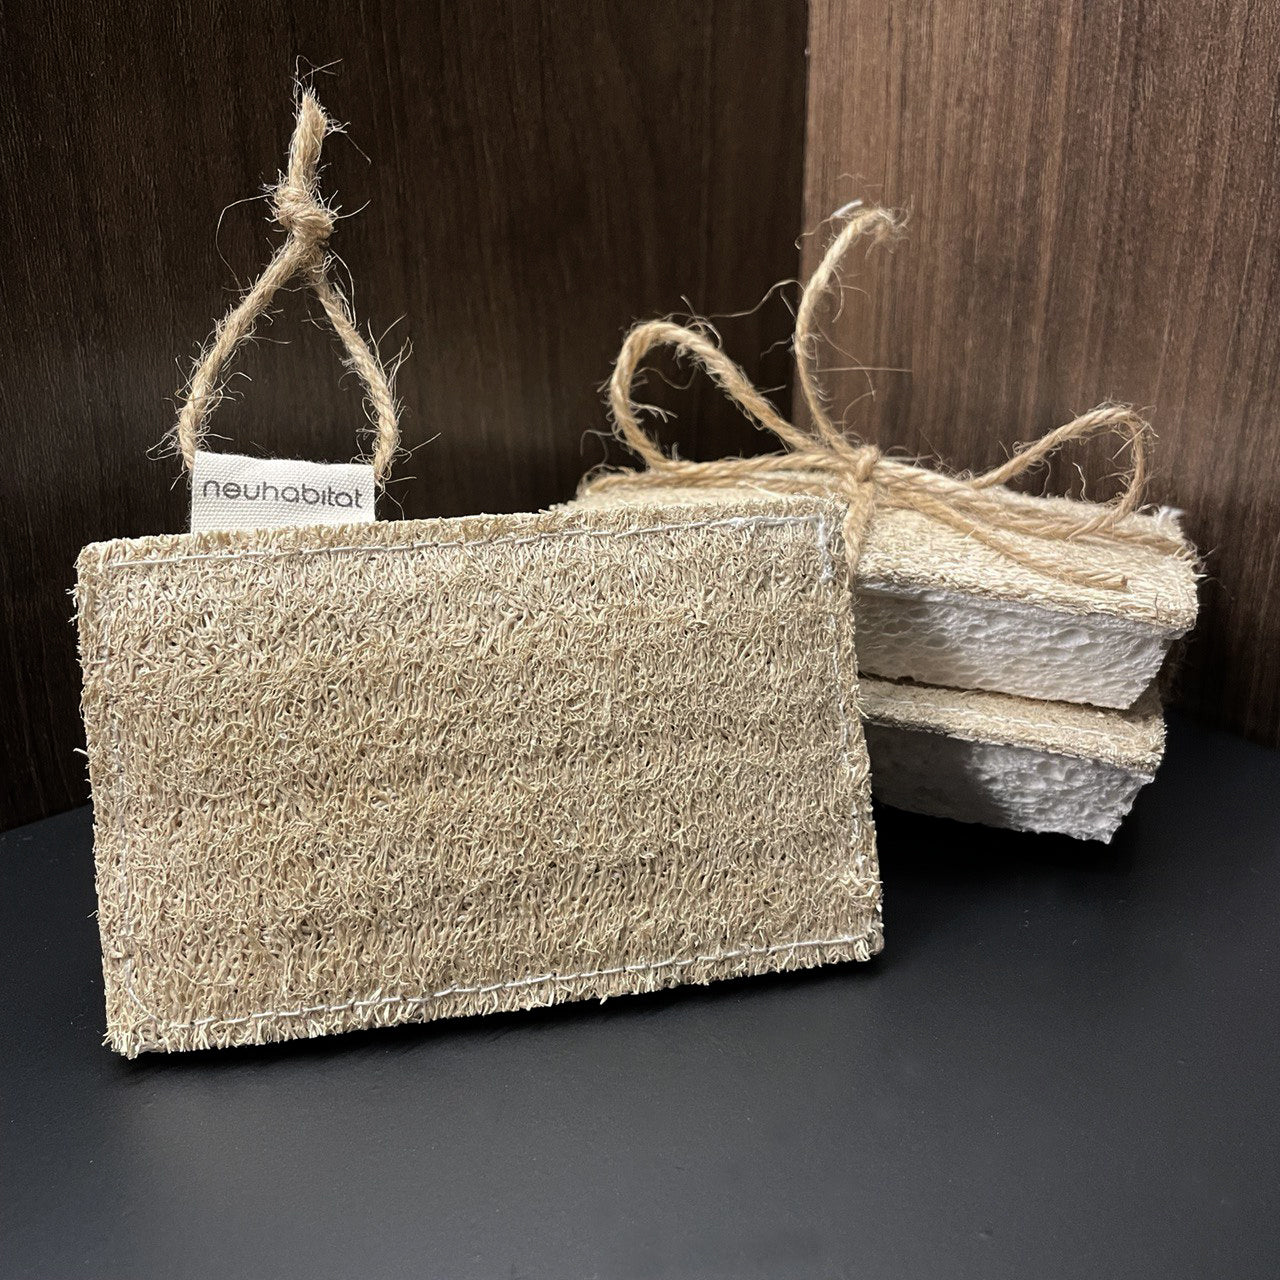 Loofah Cellulose Dishwashing Sponge Natural Cotton Stitched Plant-based Eco Friendly Luffa Scrubber Scouring Pads